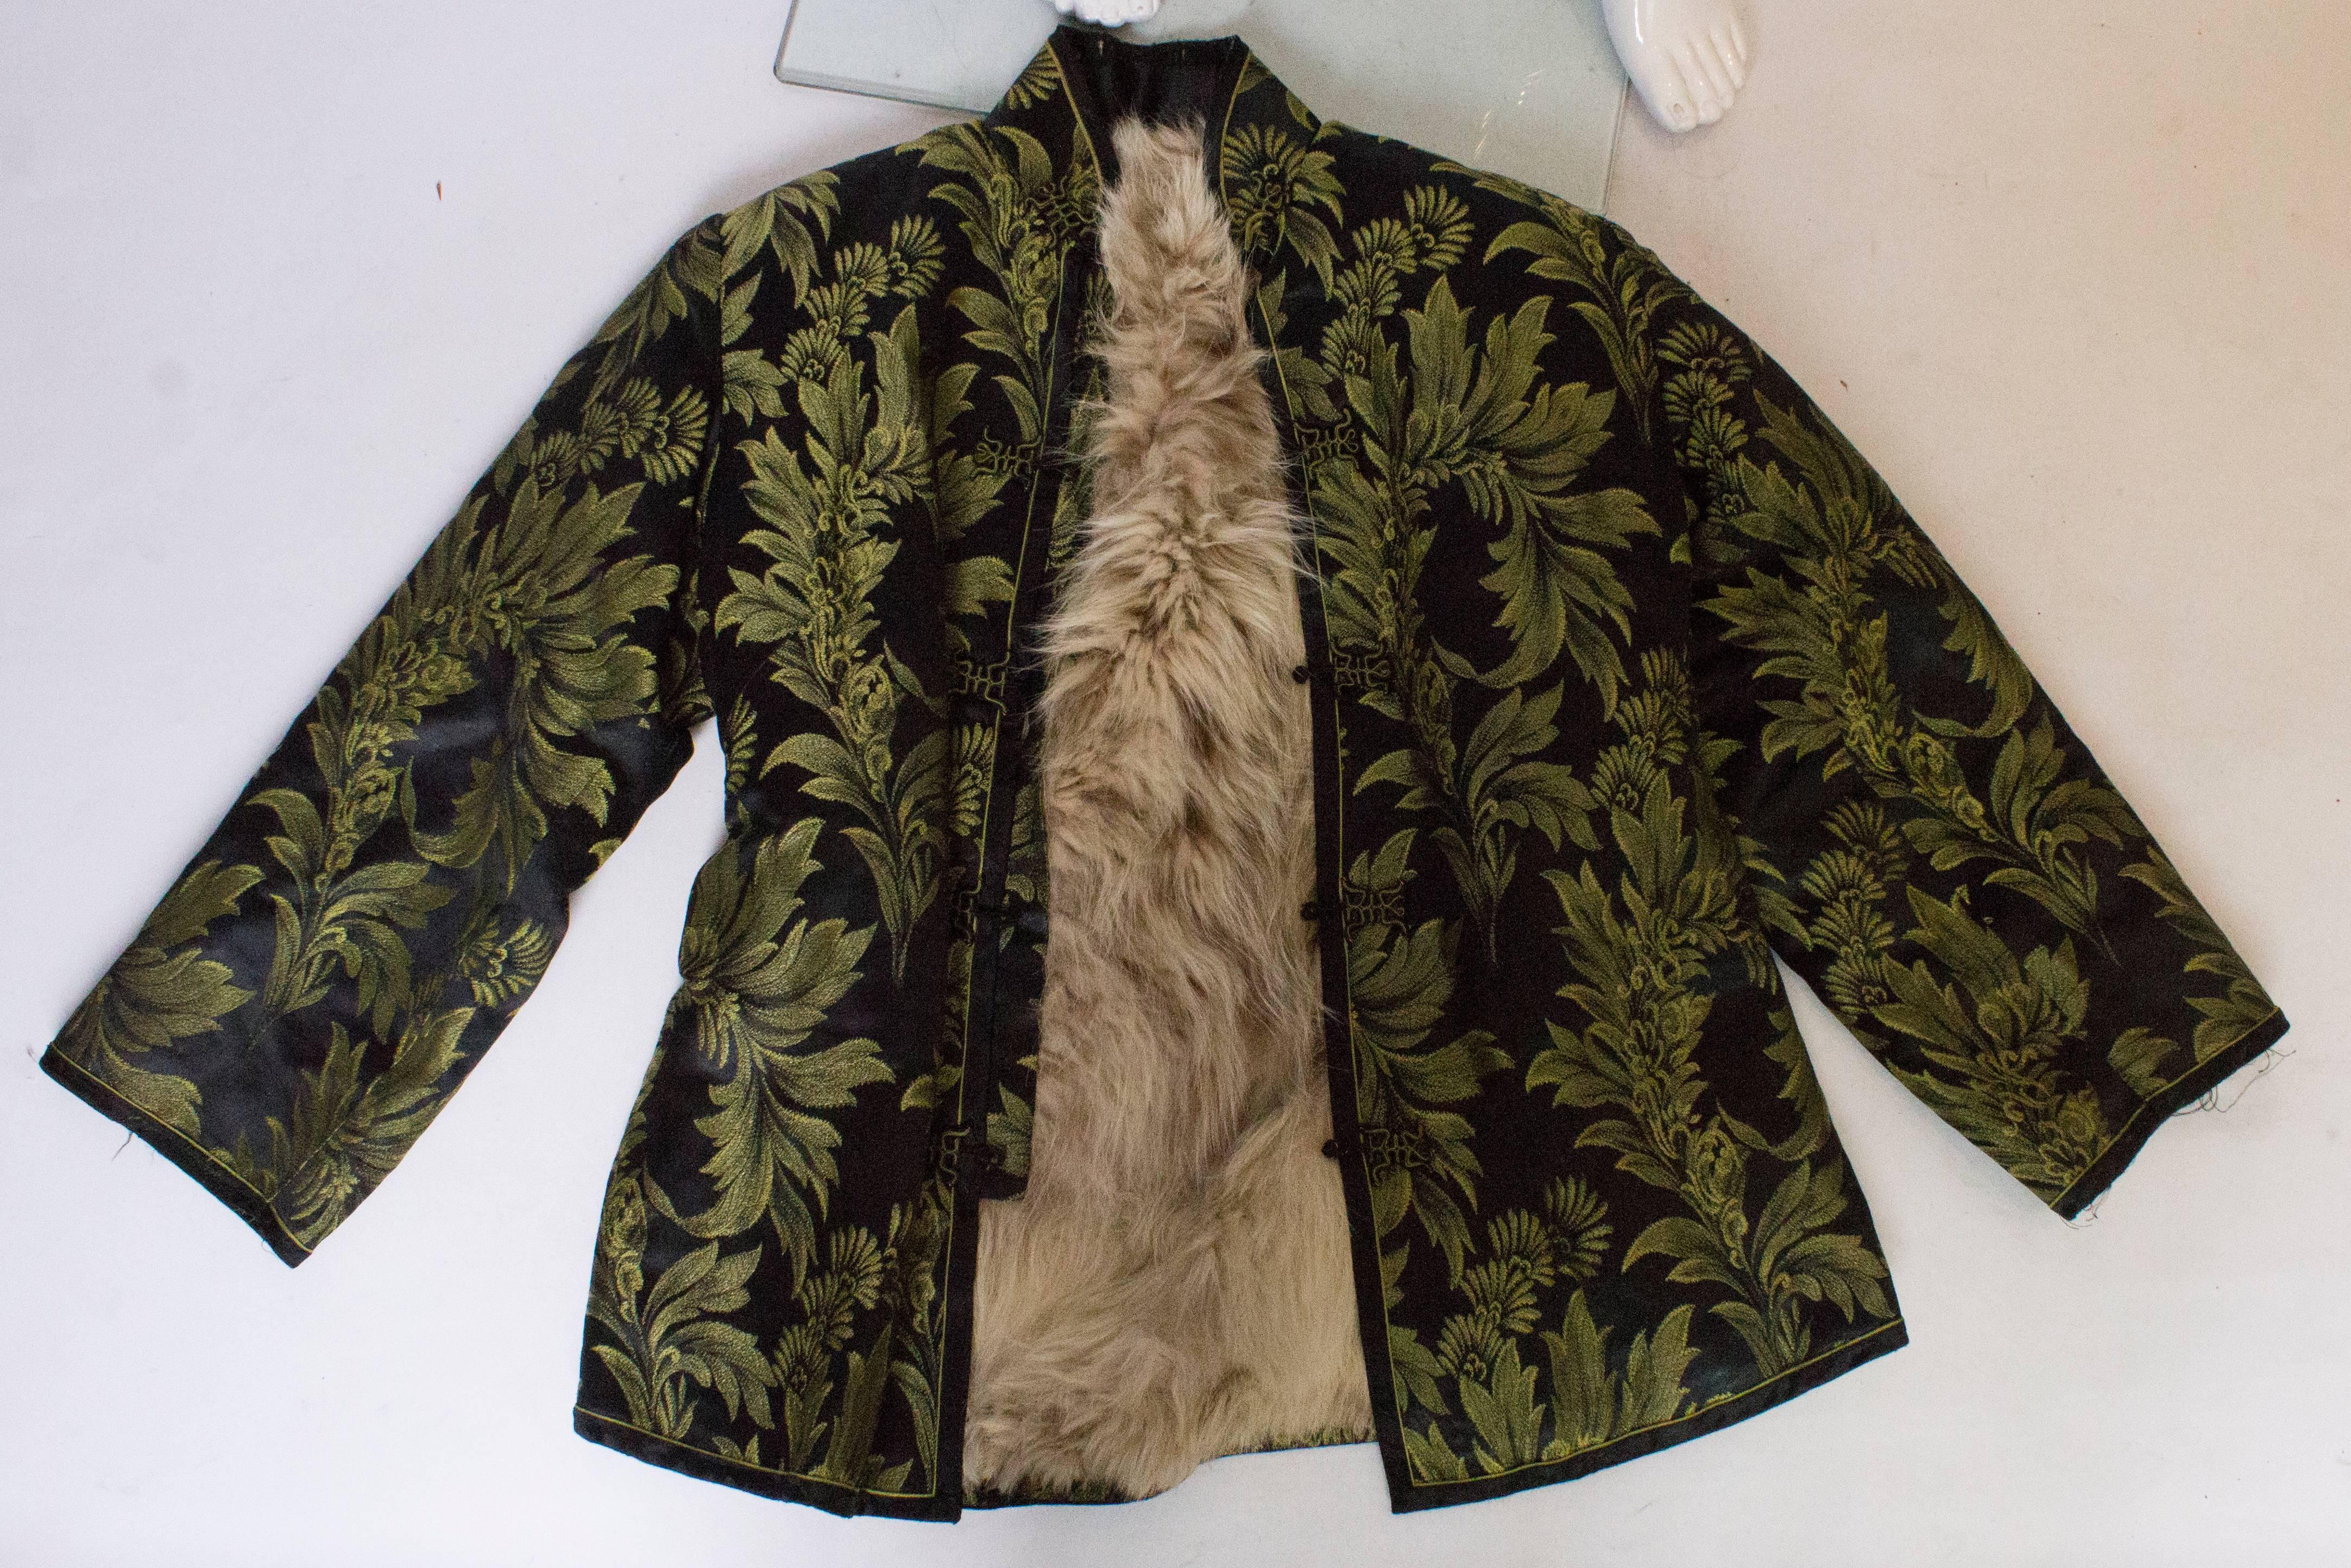 A Vintage 1980s Embroidered Chinese Jacket with Fur Lining. For Sale 1